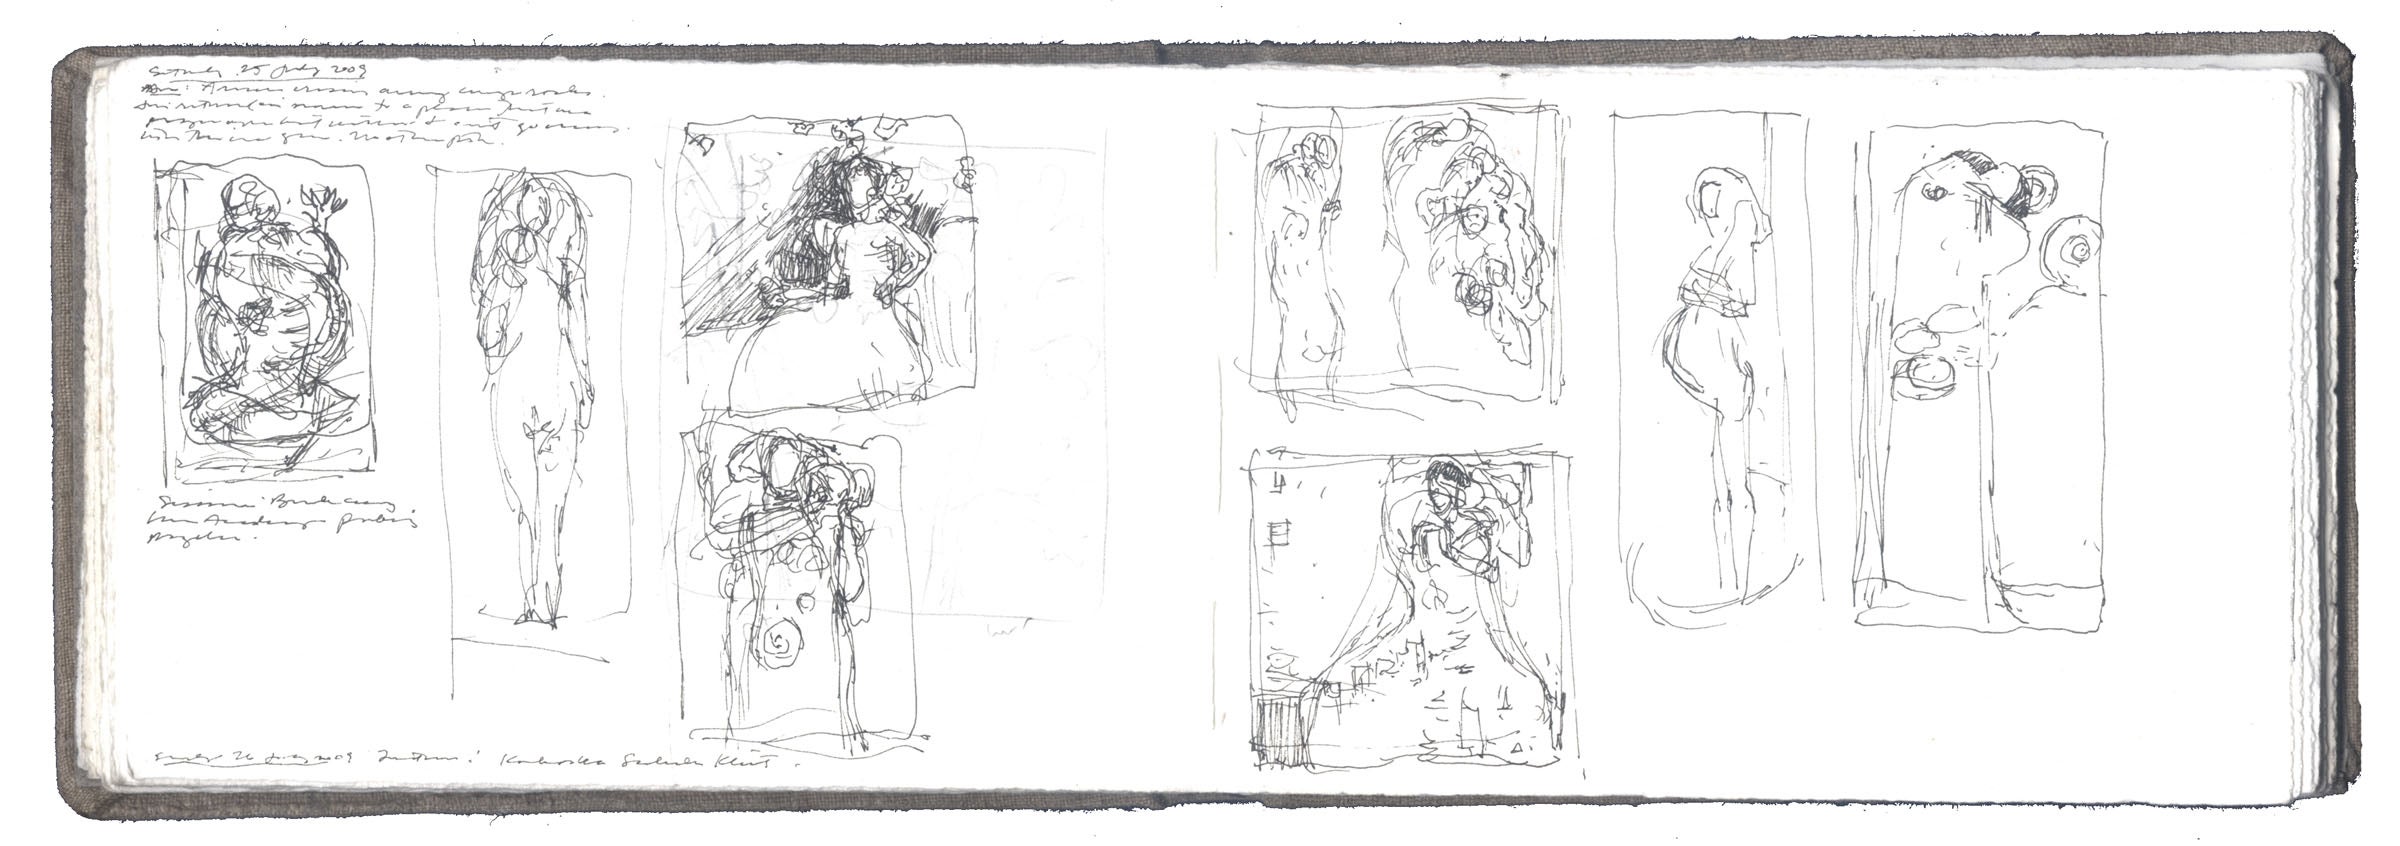 Two pages of sketches after Gustav Klimt and Egon Schiele image